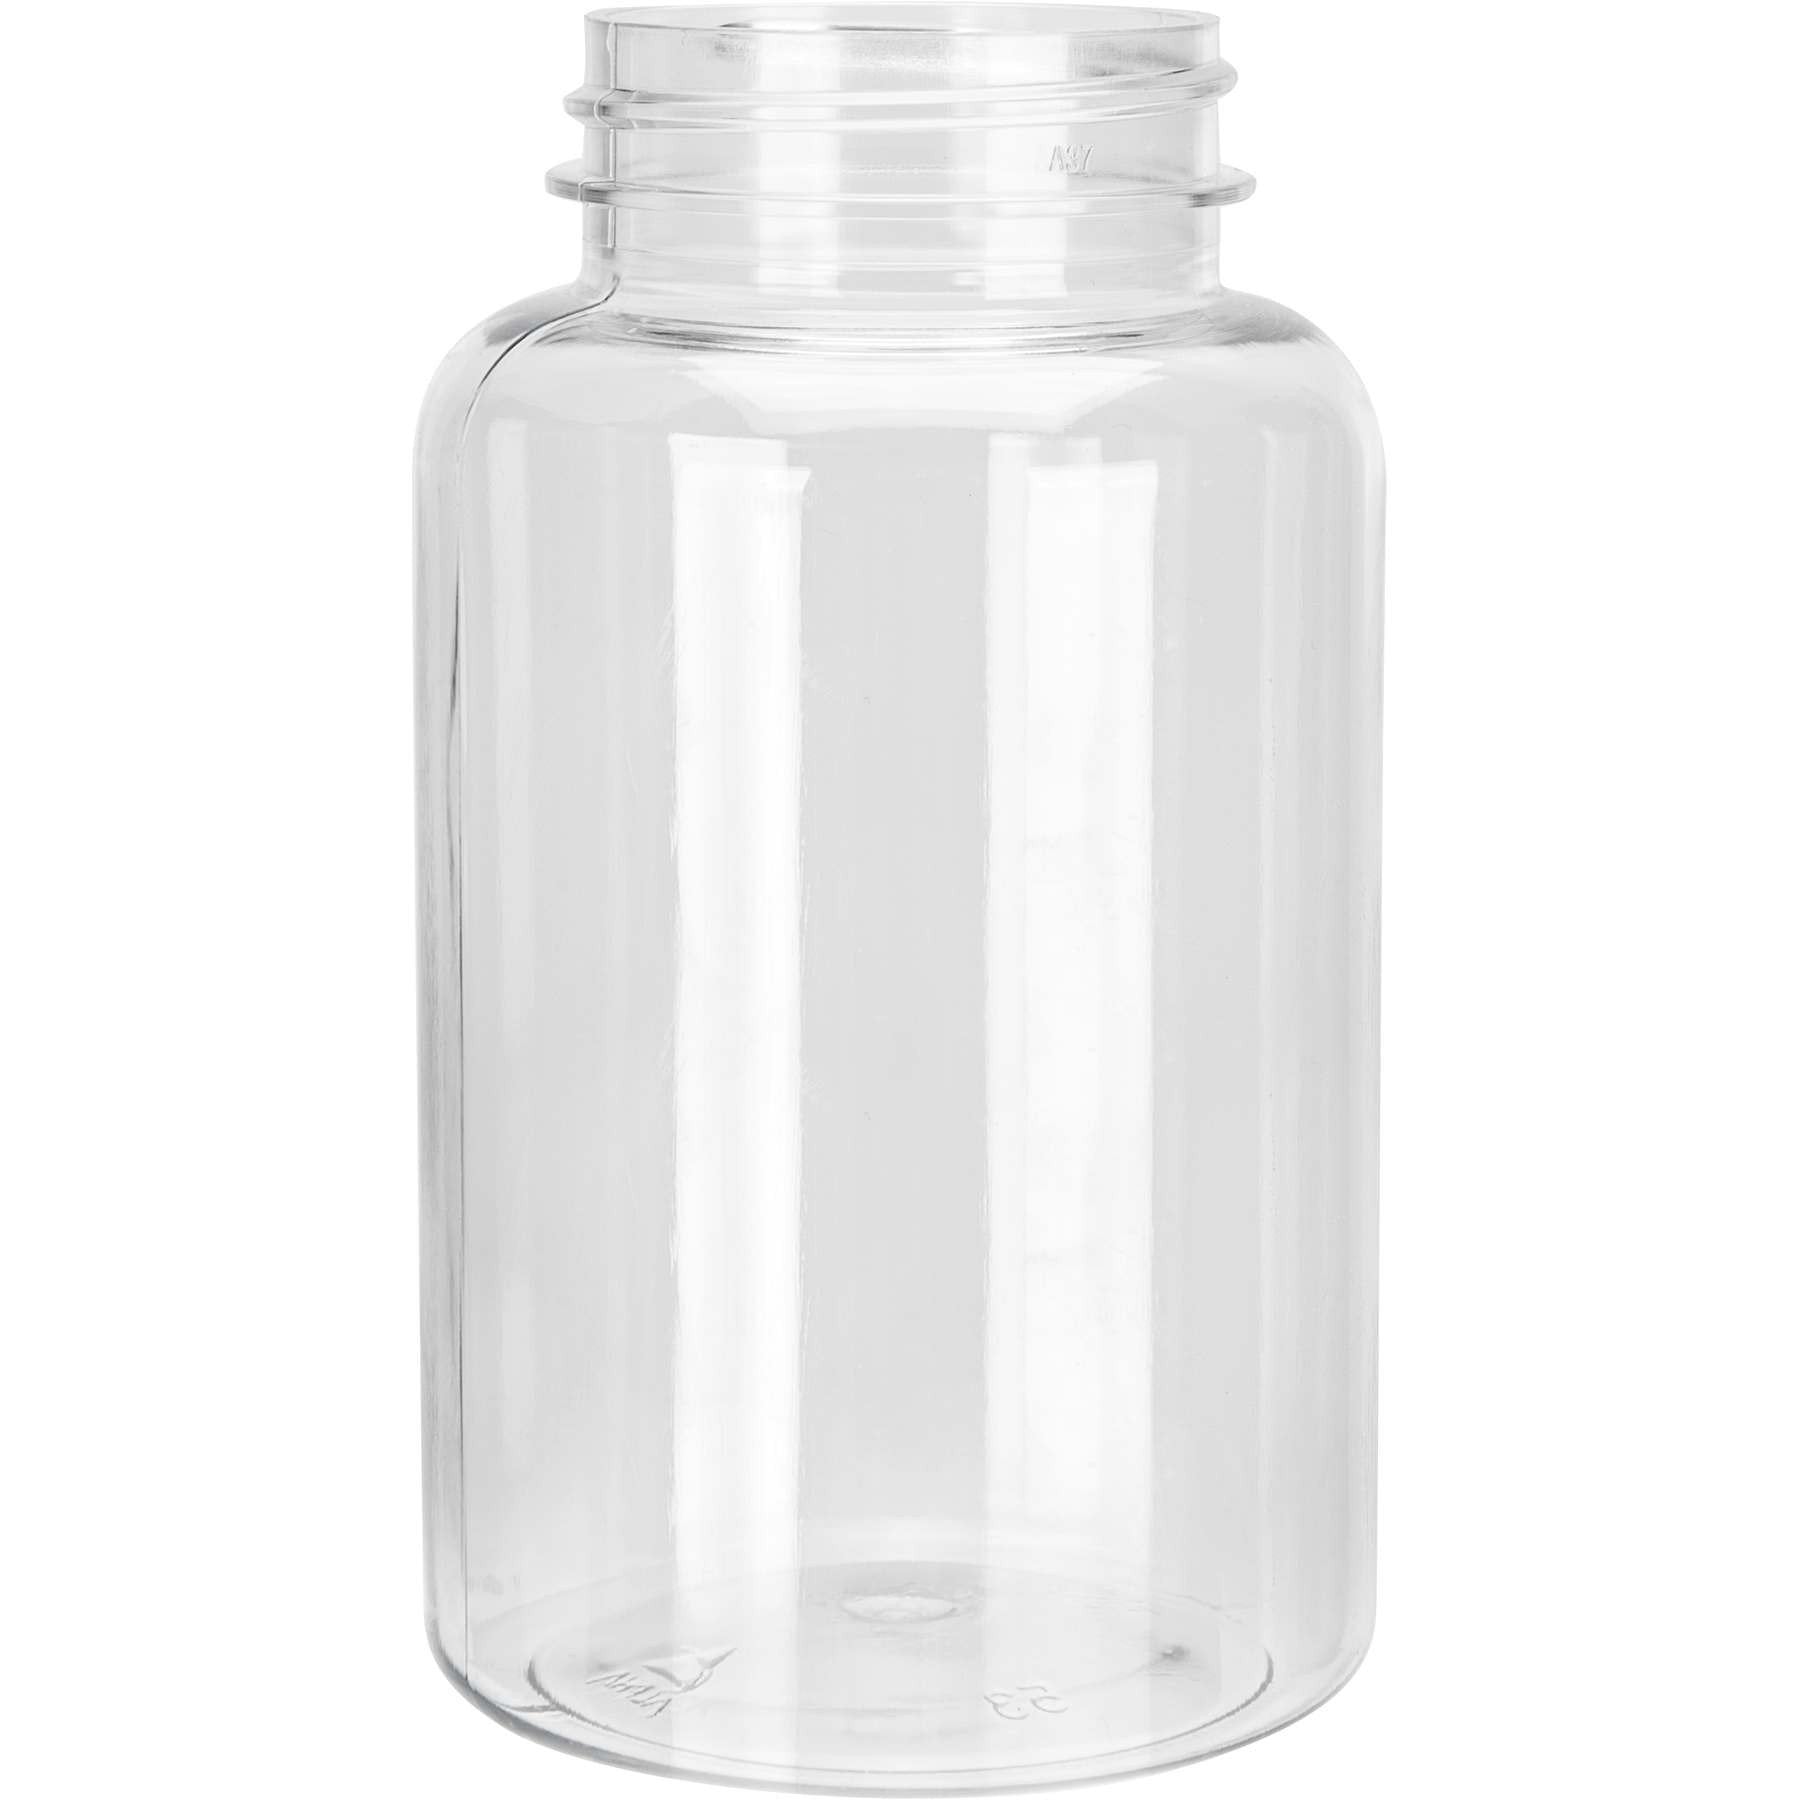 250cc Clear PET pill packer bottle with 45-400 neck finish CASED 300 - Rock Bottom Bottles / Packaging Company LLC